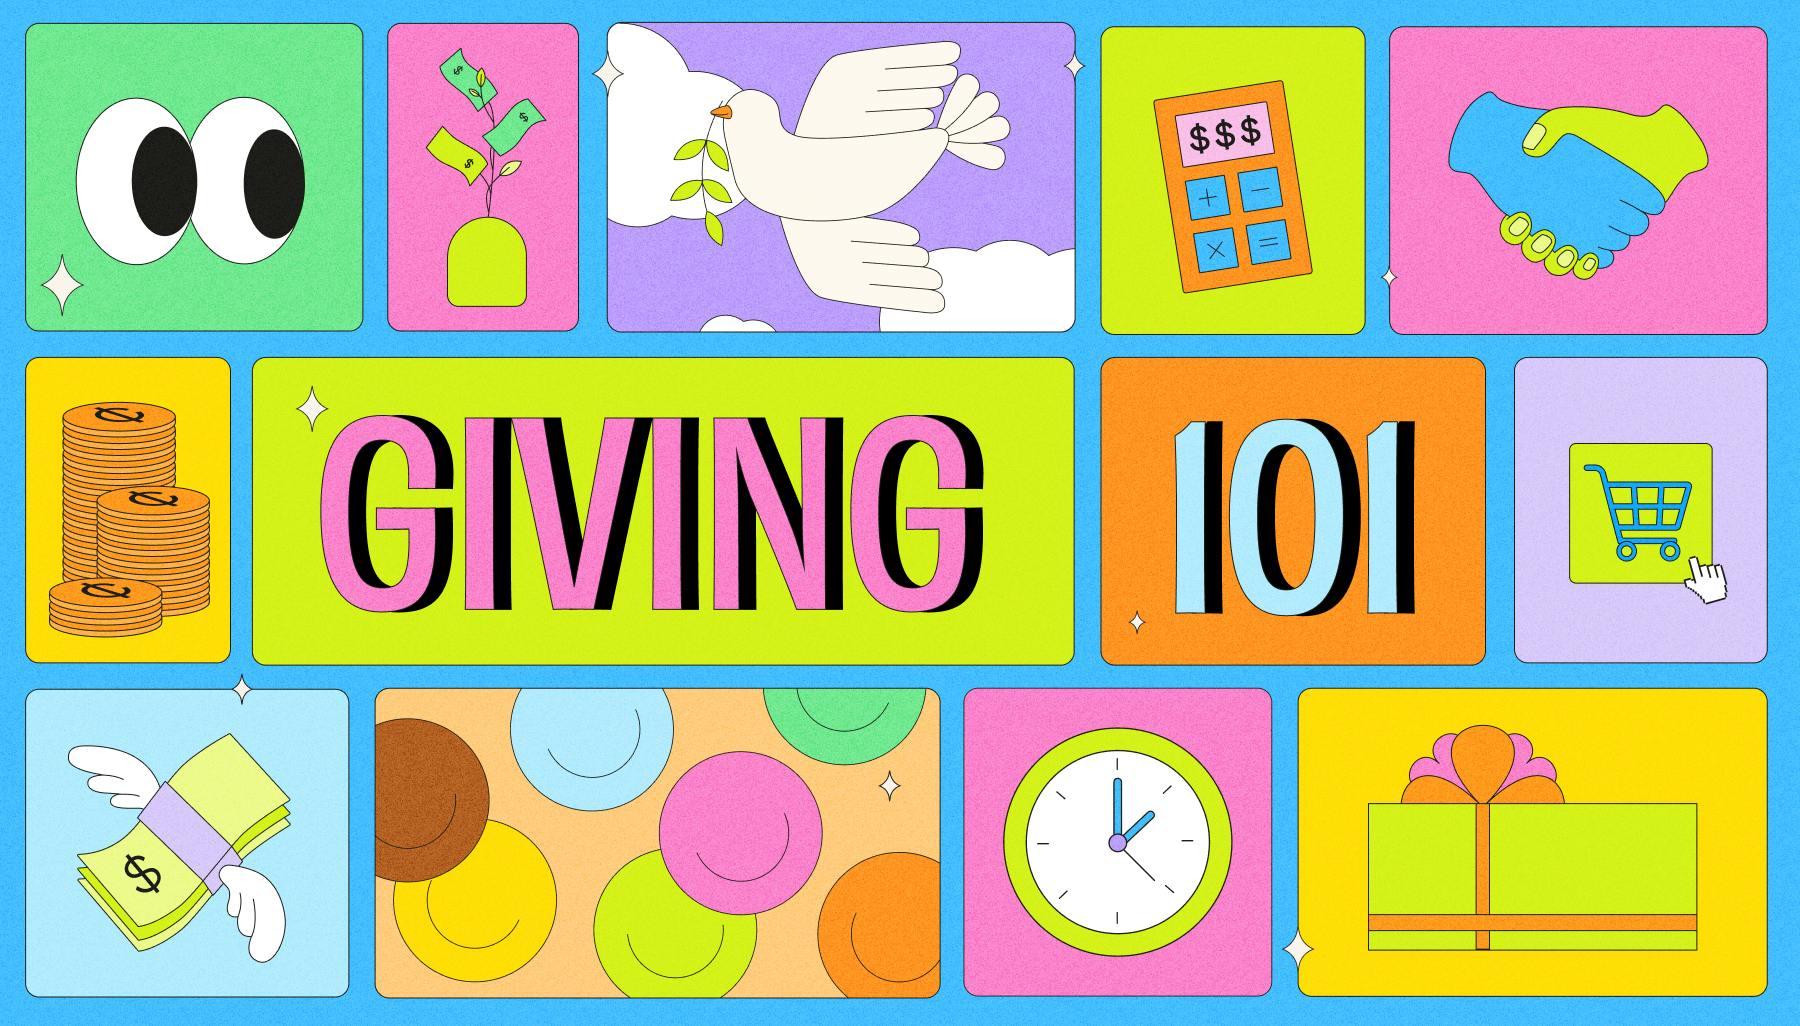 Illustration featuring coins, calculator, money, gift, and clock with text saying Giving 101